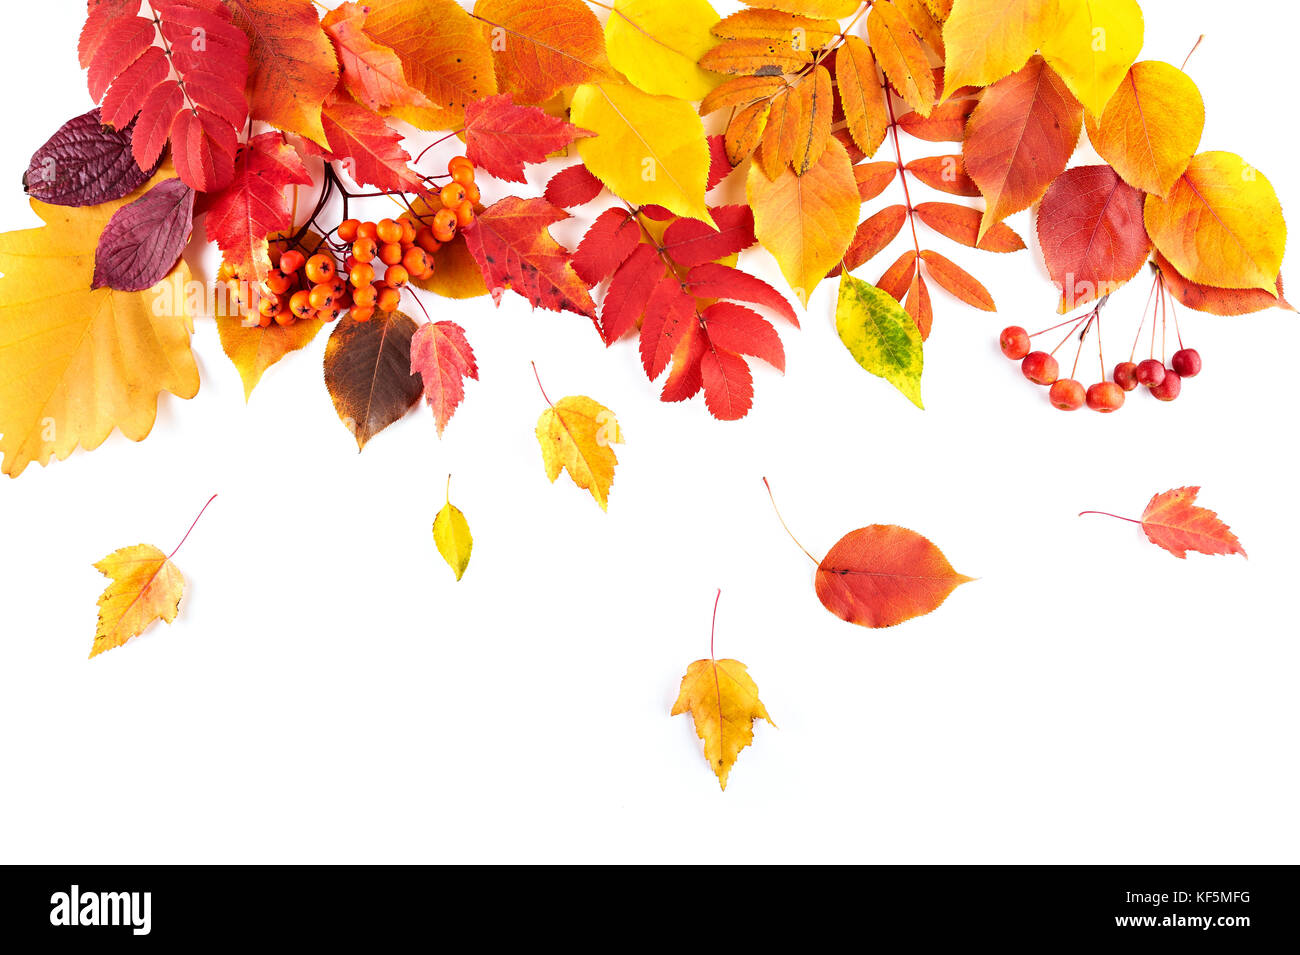 Red and yellow autumn leaves fall down isolated on white background. Top view. Stock Photo